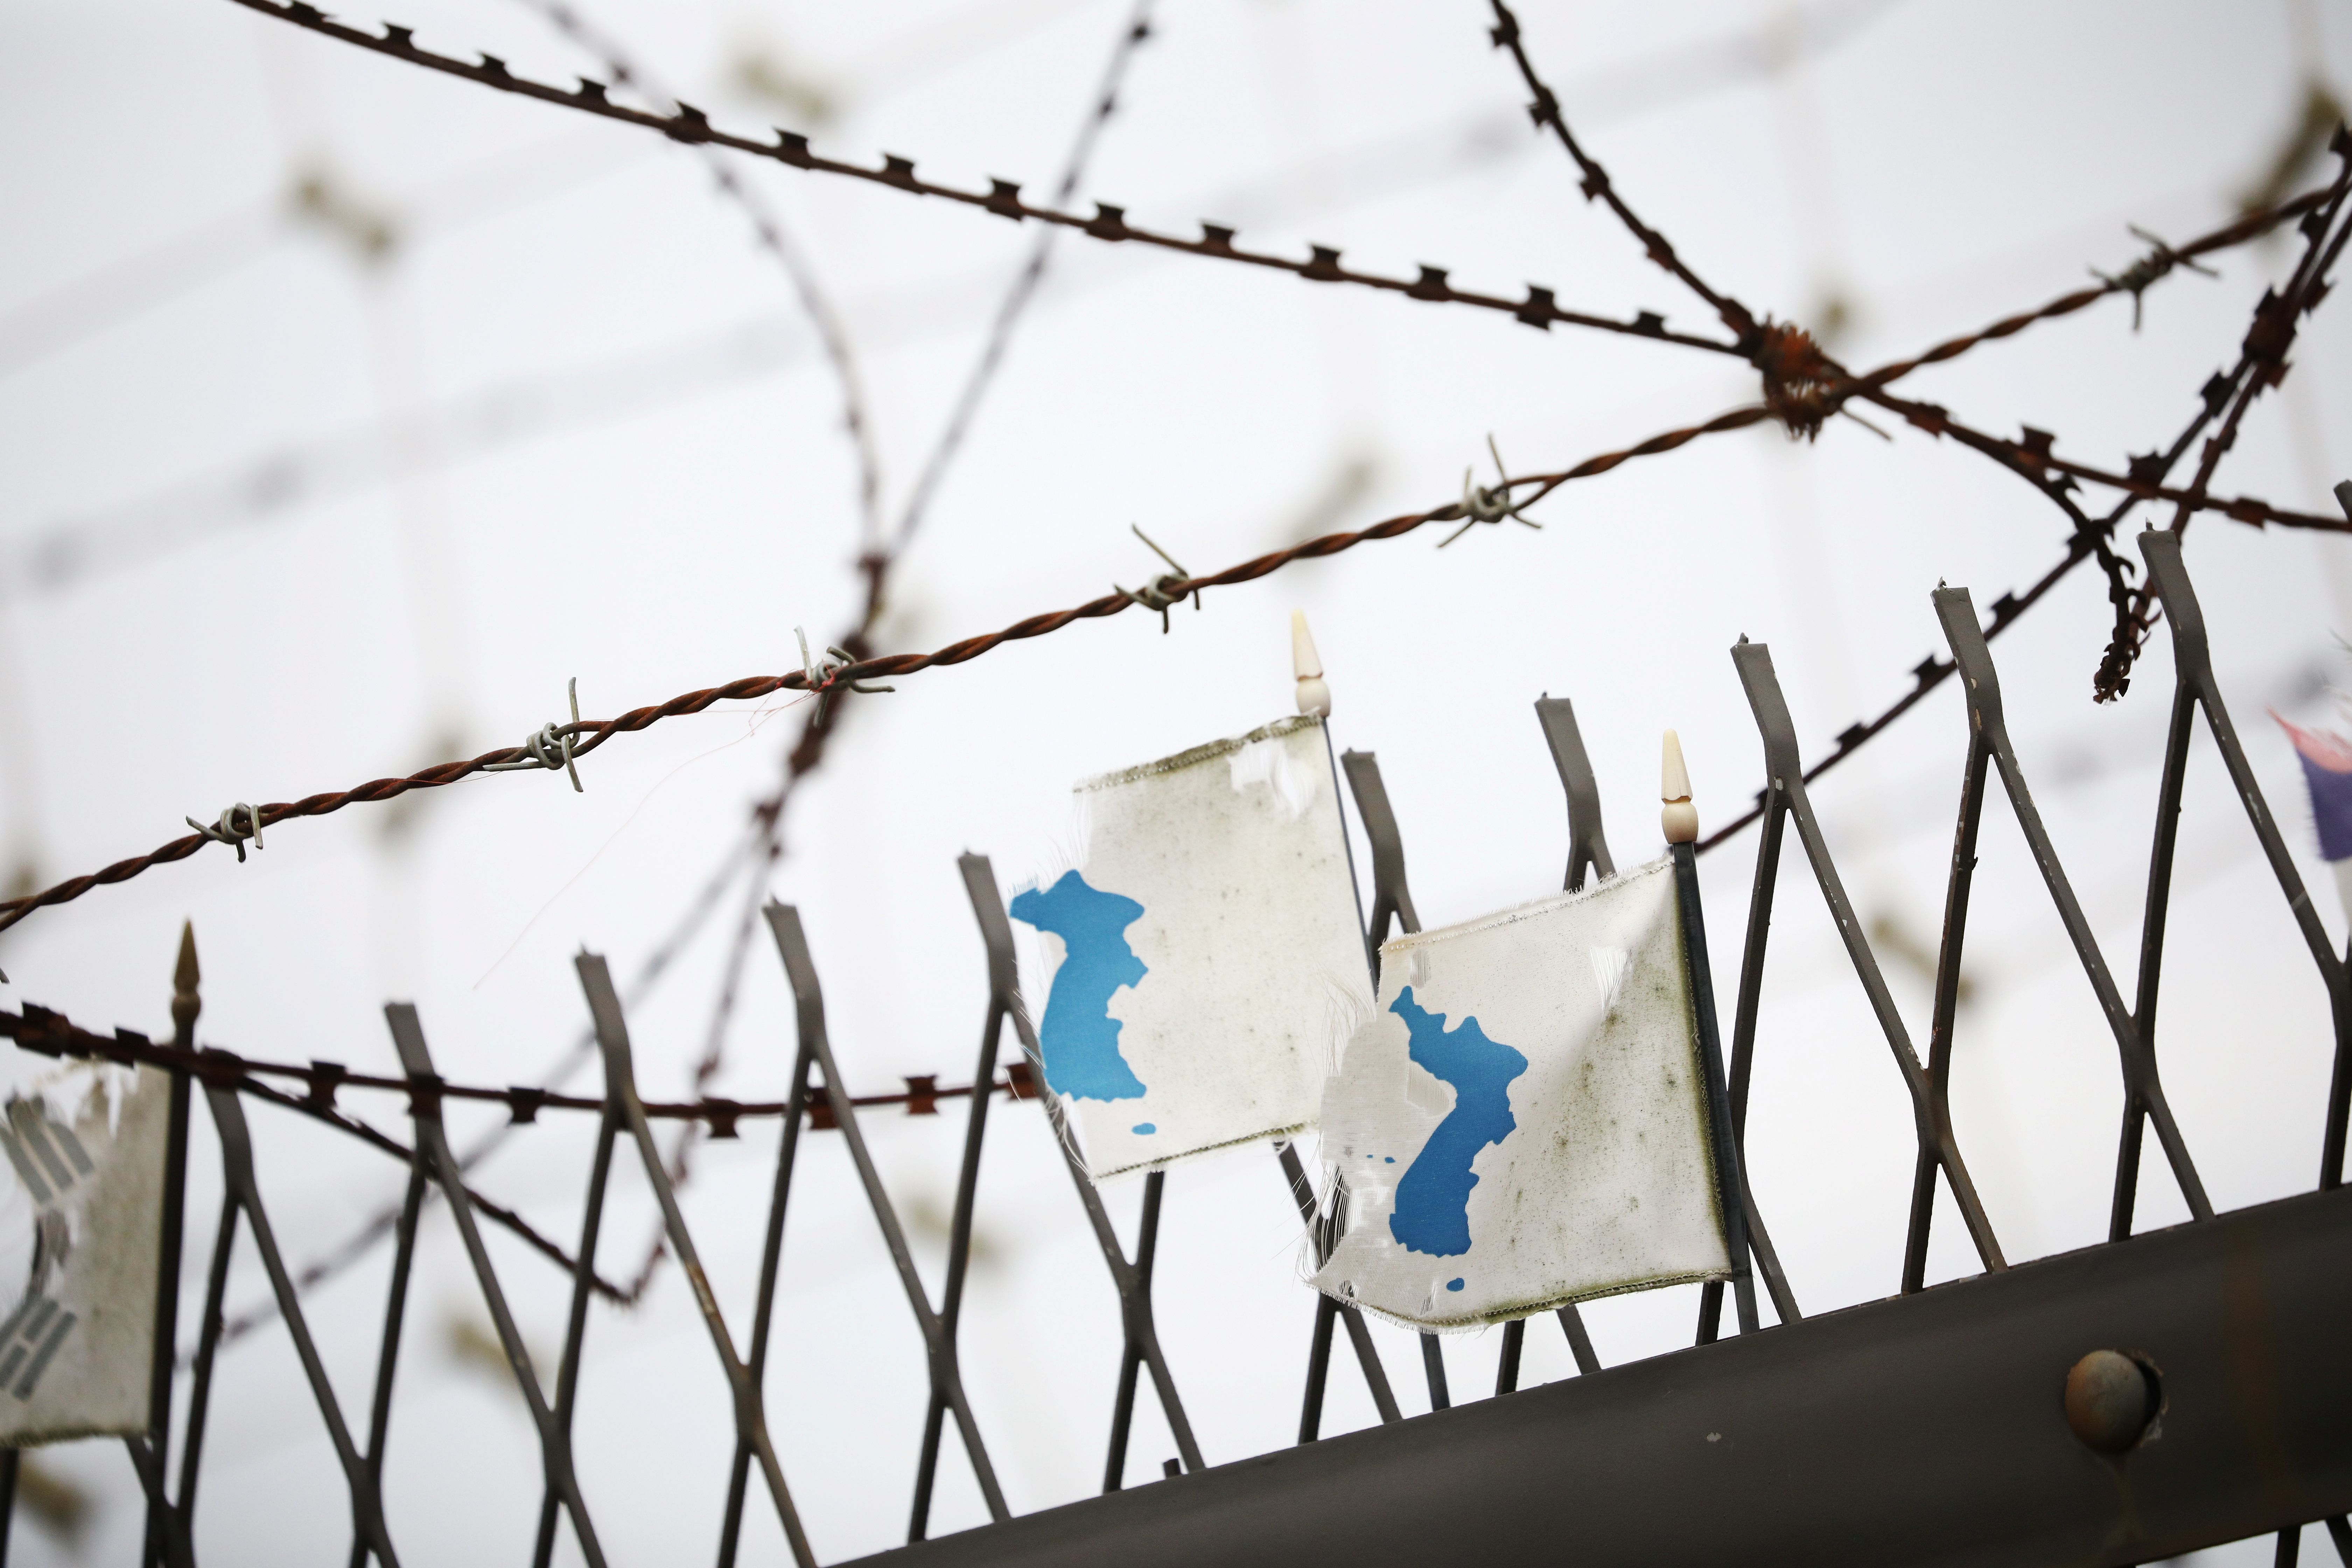 Korean Unification flags defaced by strong wind hang on a military fence near the demilitarized zone separating the two Koreas in Paju